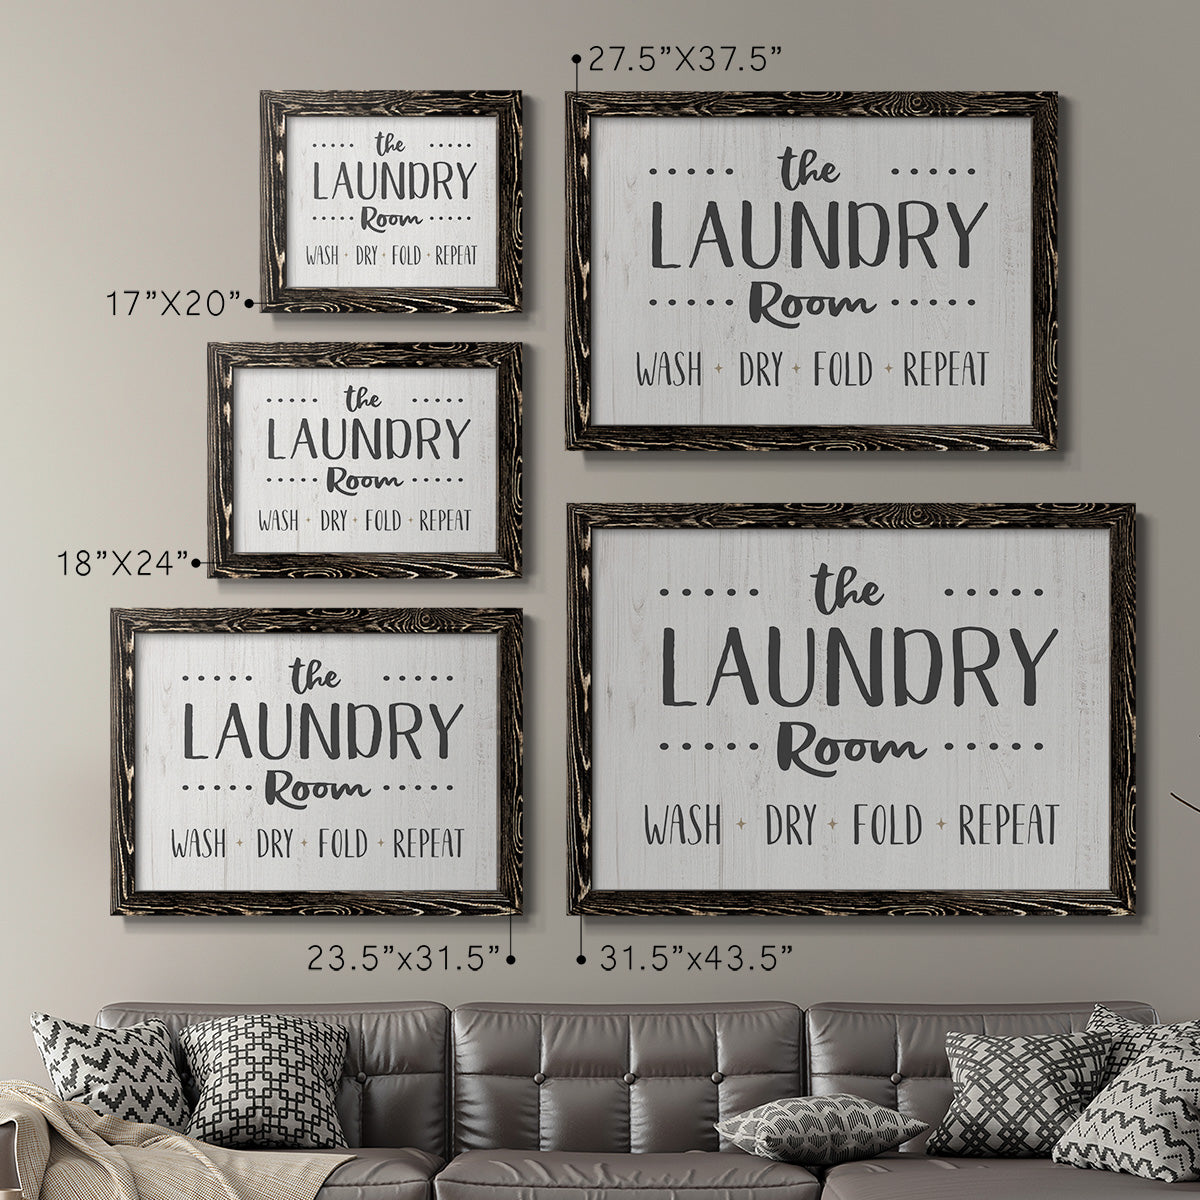 The Laundry Room-Premium Framed Canvas - Ready to Hang